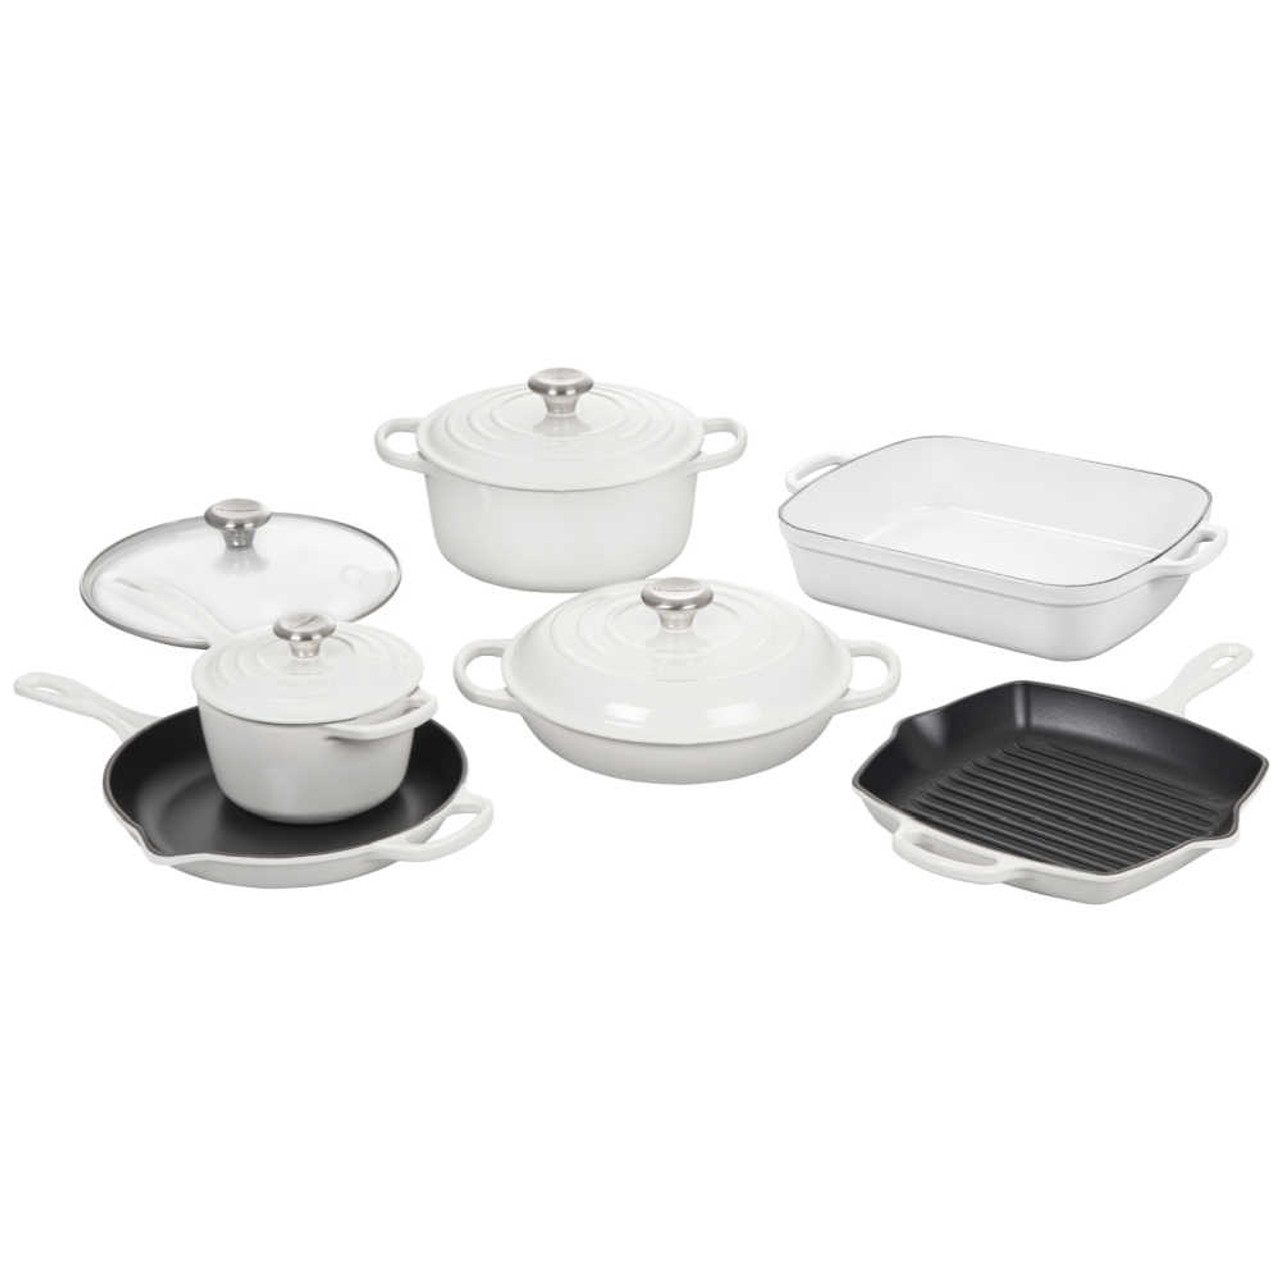 https://cdn11.bigcommerce.com/s-hccytny0od/images/stencil/1280x1280/products/4451/17461/Le_Creuset_10-Piece_Cast_Iron_Cookware_Set_in_White__21620.1639078360.jpg?c=2?imbypass=on